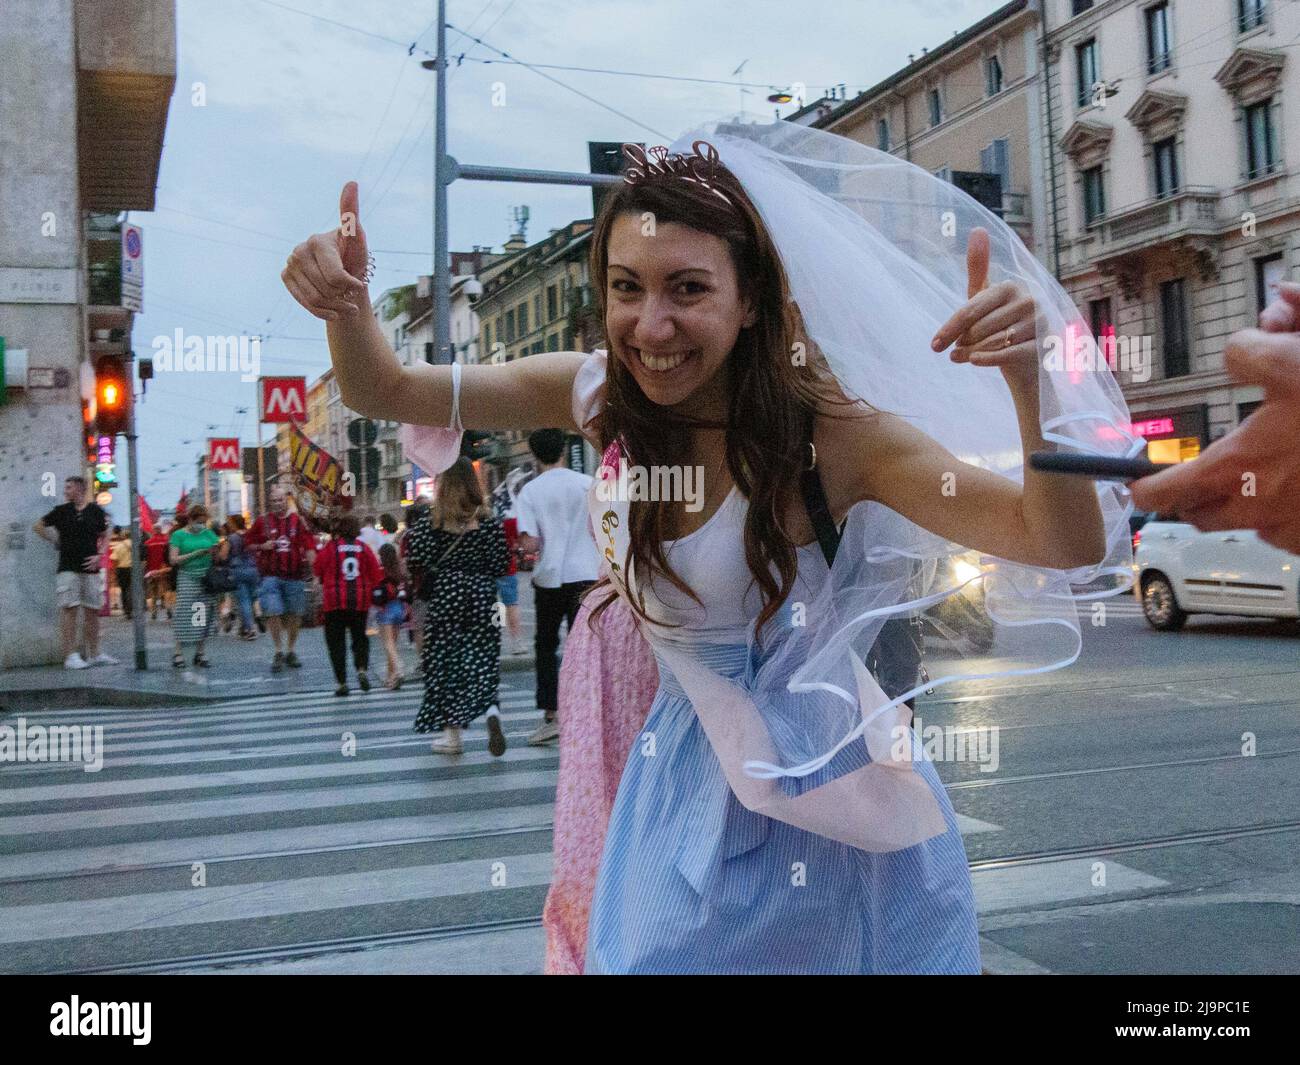 Fans of AC Milan celebrate after winning the Italian Serie A Championship on Corso Buenos Aires, on May 22, 2022 in Milan, Italy. Stock Photo